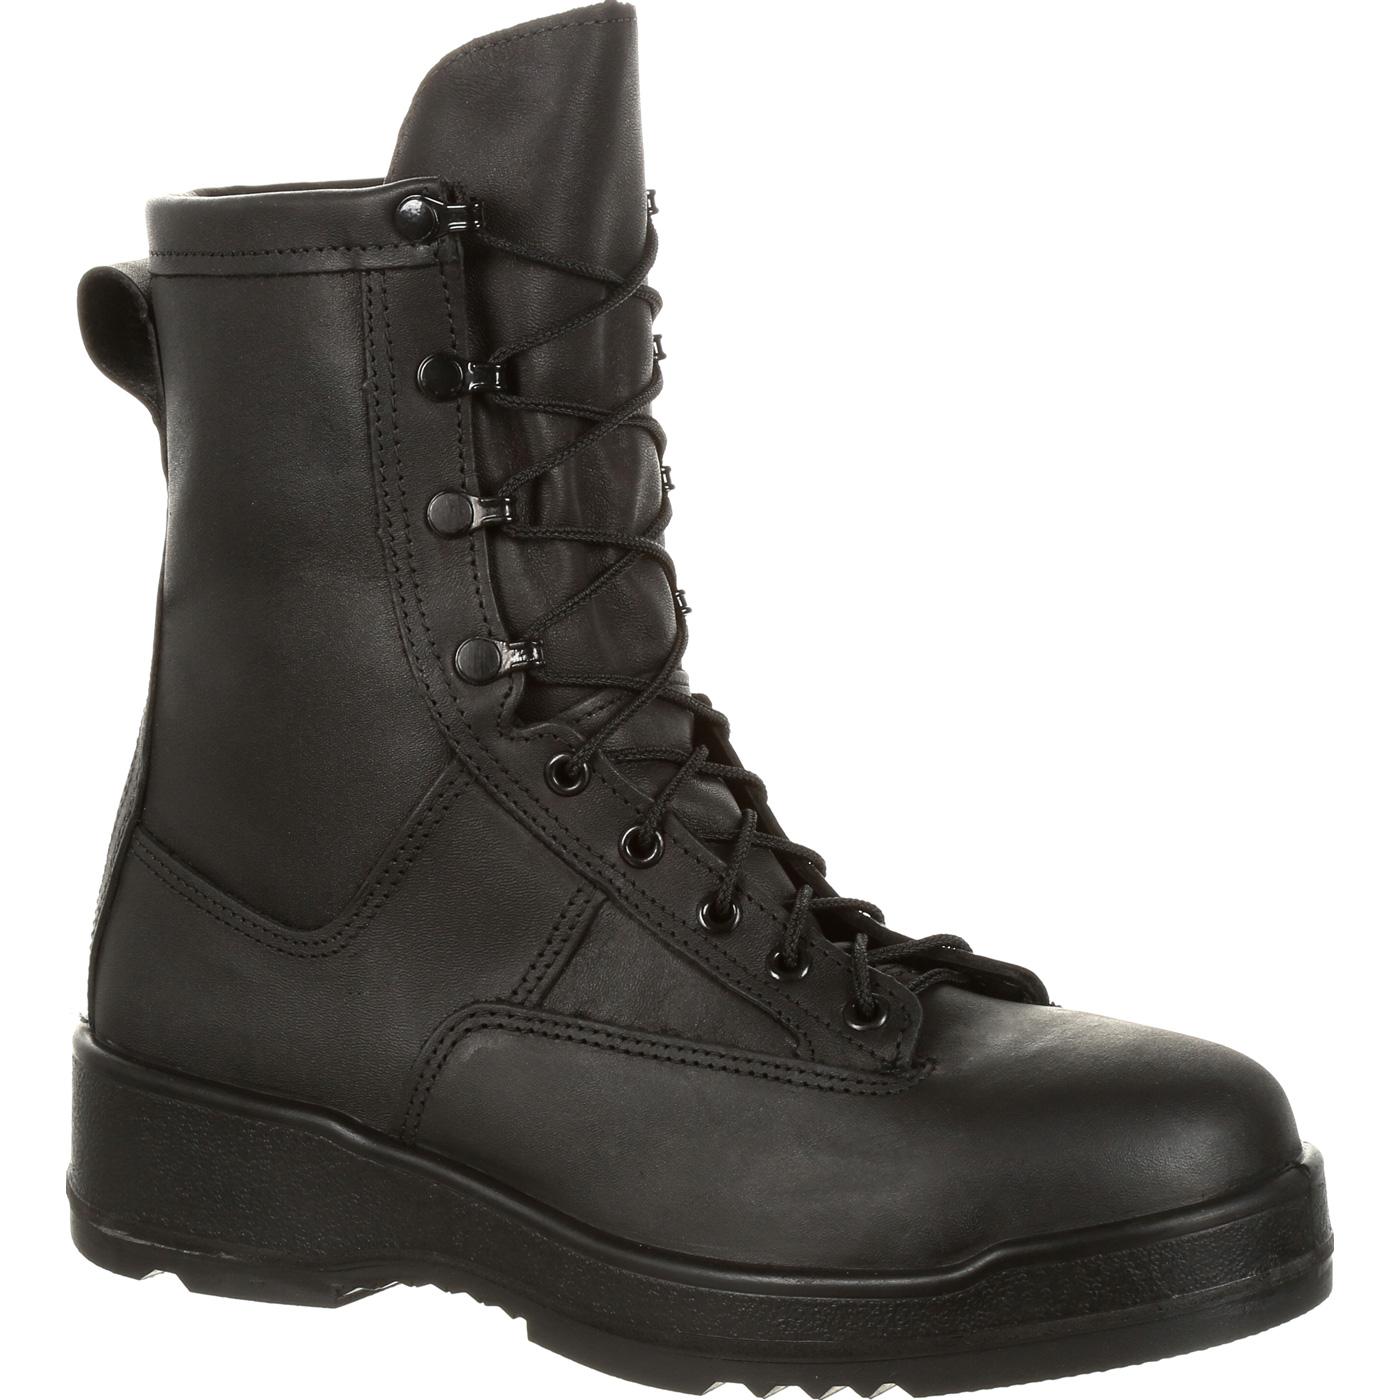 Rocky Hot Weather Military Boots | Buy Insulated Waterproof Black Steel Toe  Army Boots for Hot Weather from Rocky Boots